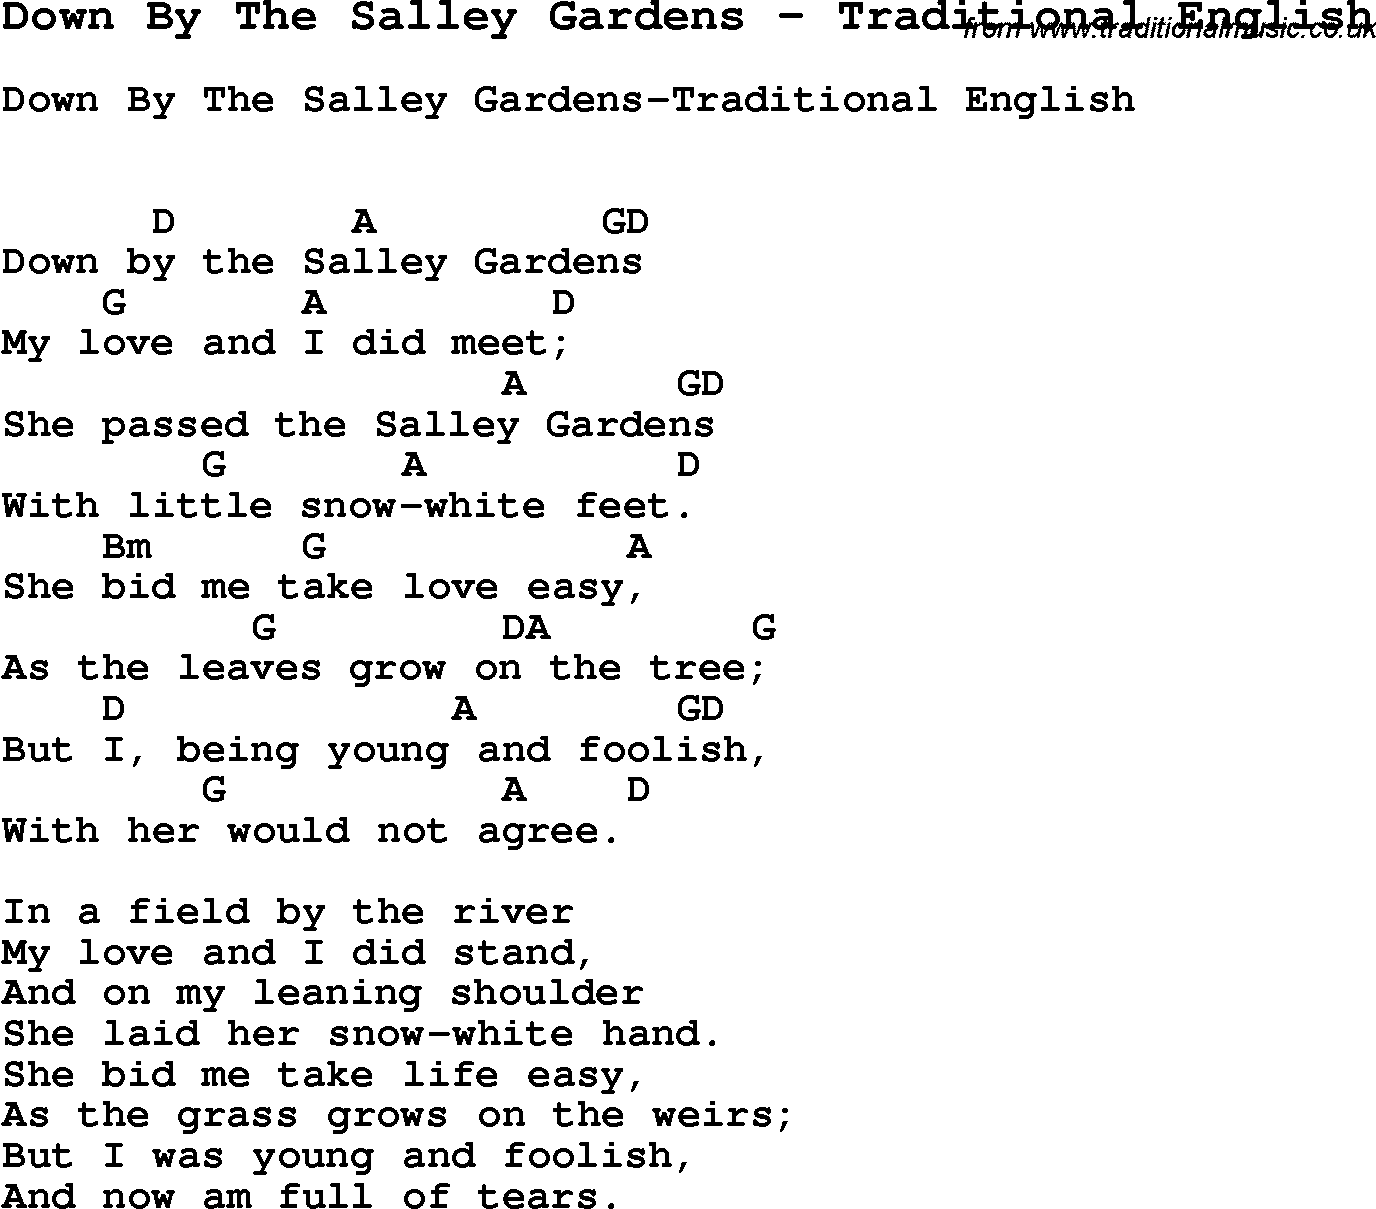 Song Down By The Salley Gardens by Traditional English, with lyrics for vocal performance and accompaniment chords for Ukulele, Guitar Banjo etc.